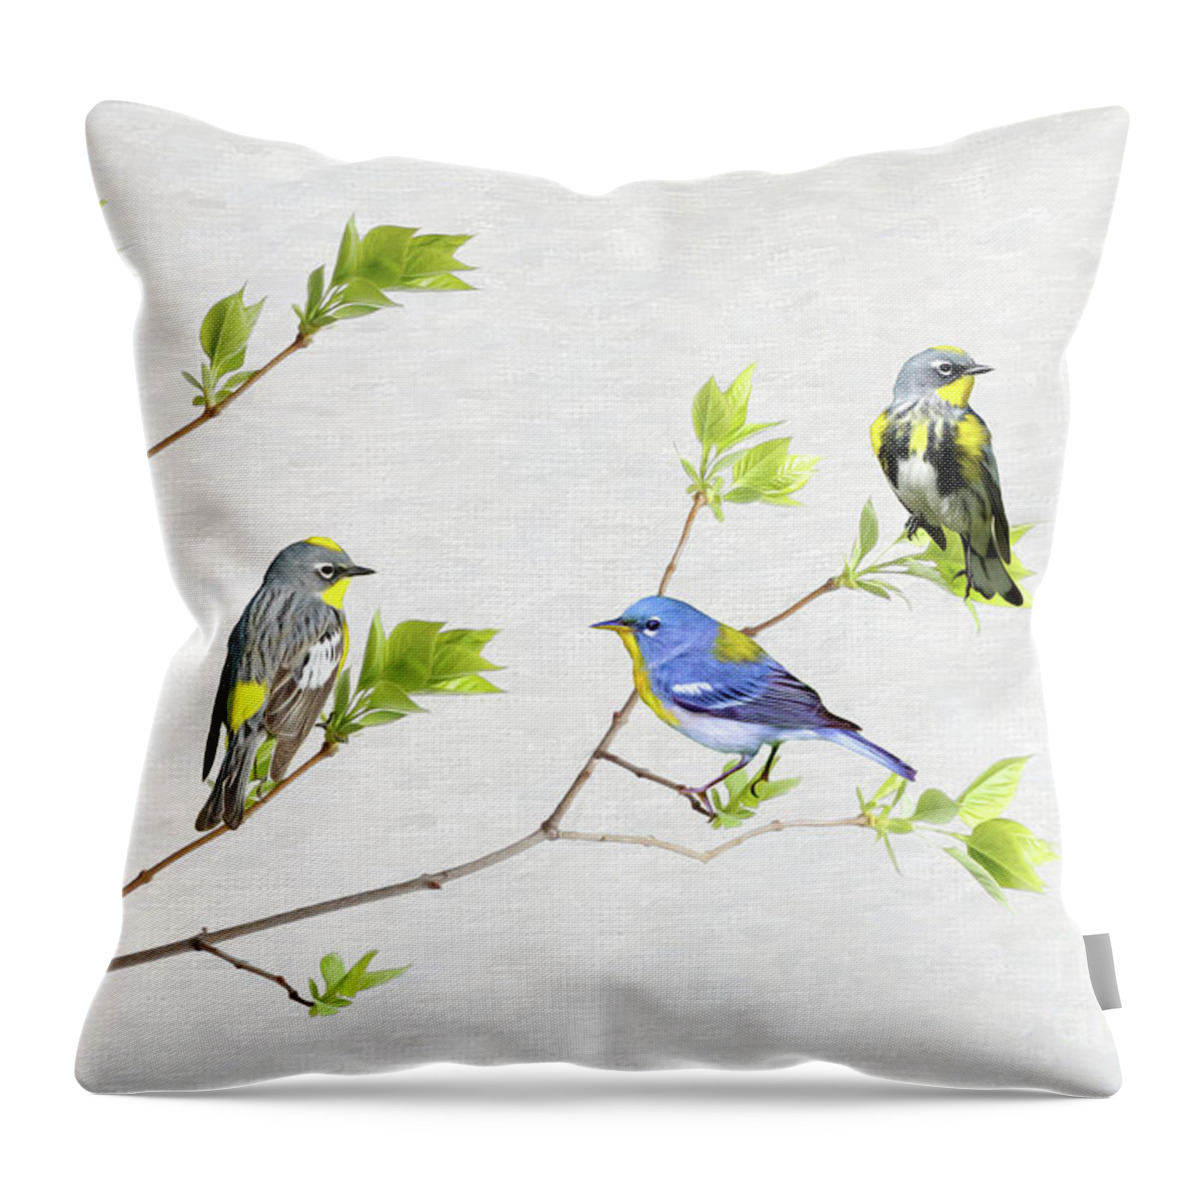 Warbler Birds Throw Pillow featuring the photograph Spring Warblers by Laura D Young